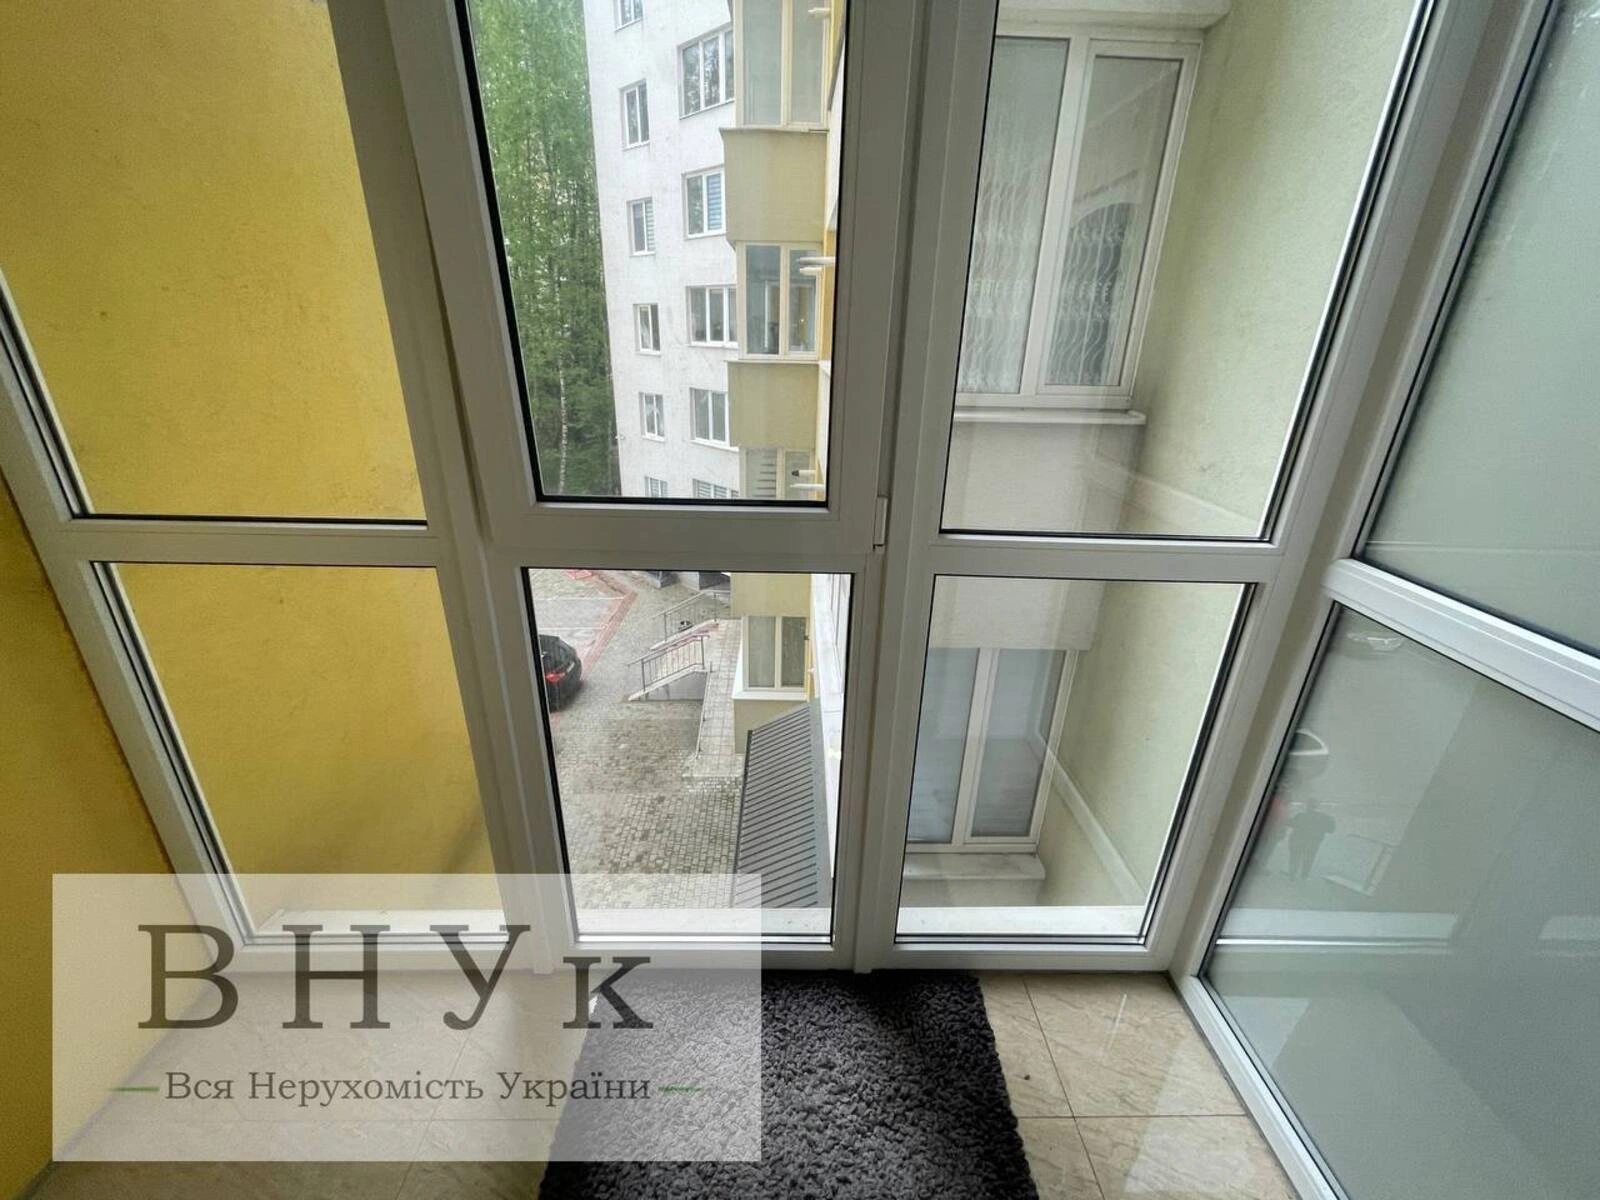 Apartments for sale. 2 rooms, 73 m², 3rd floor/10 floors. Budnoho S. , Ternopil. 